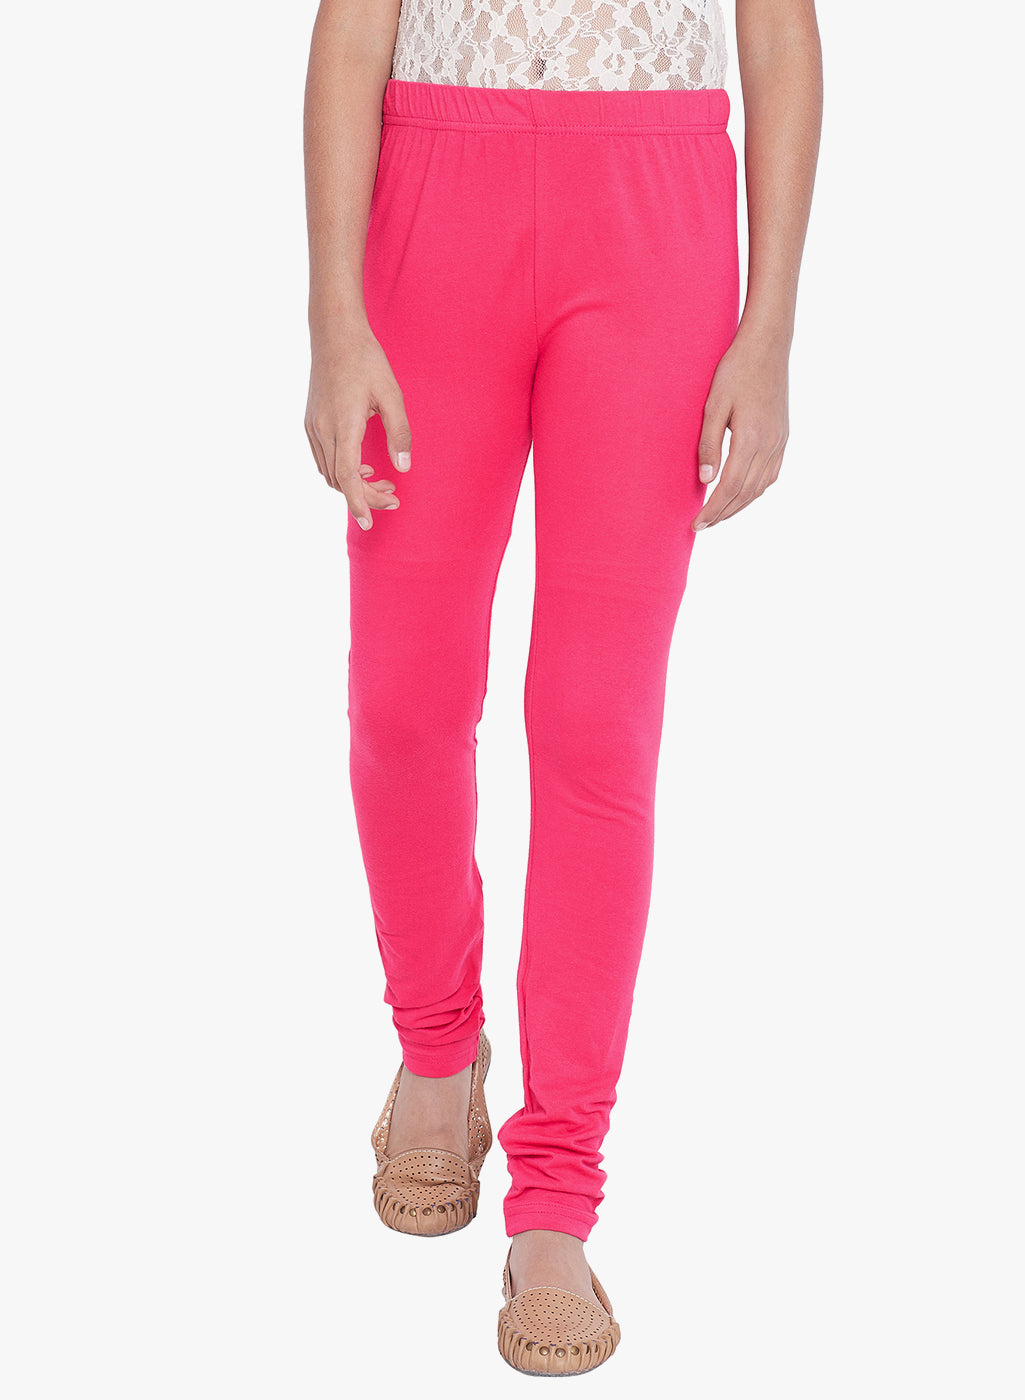 Plain Pink Colour Full Length Cotton Lycra Leggings, Size: Large at Rs  249.00 in Secunderabad